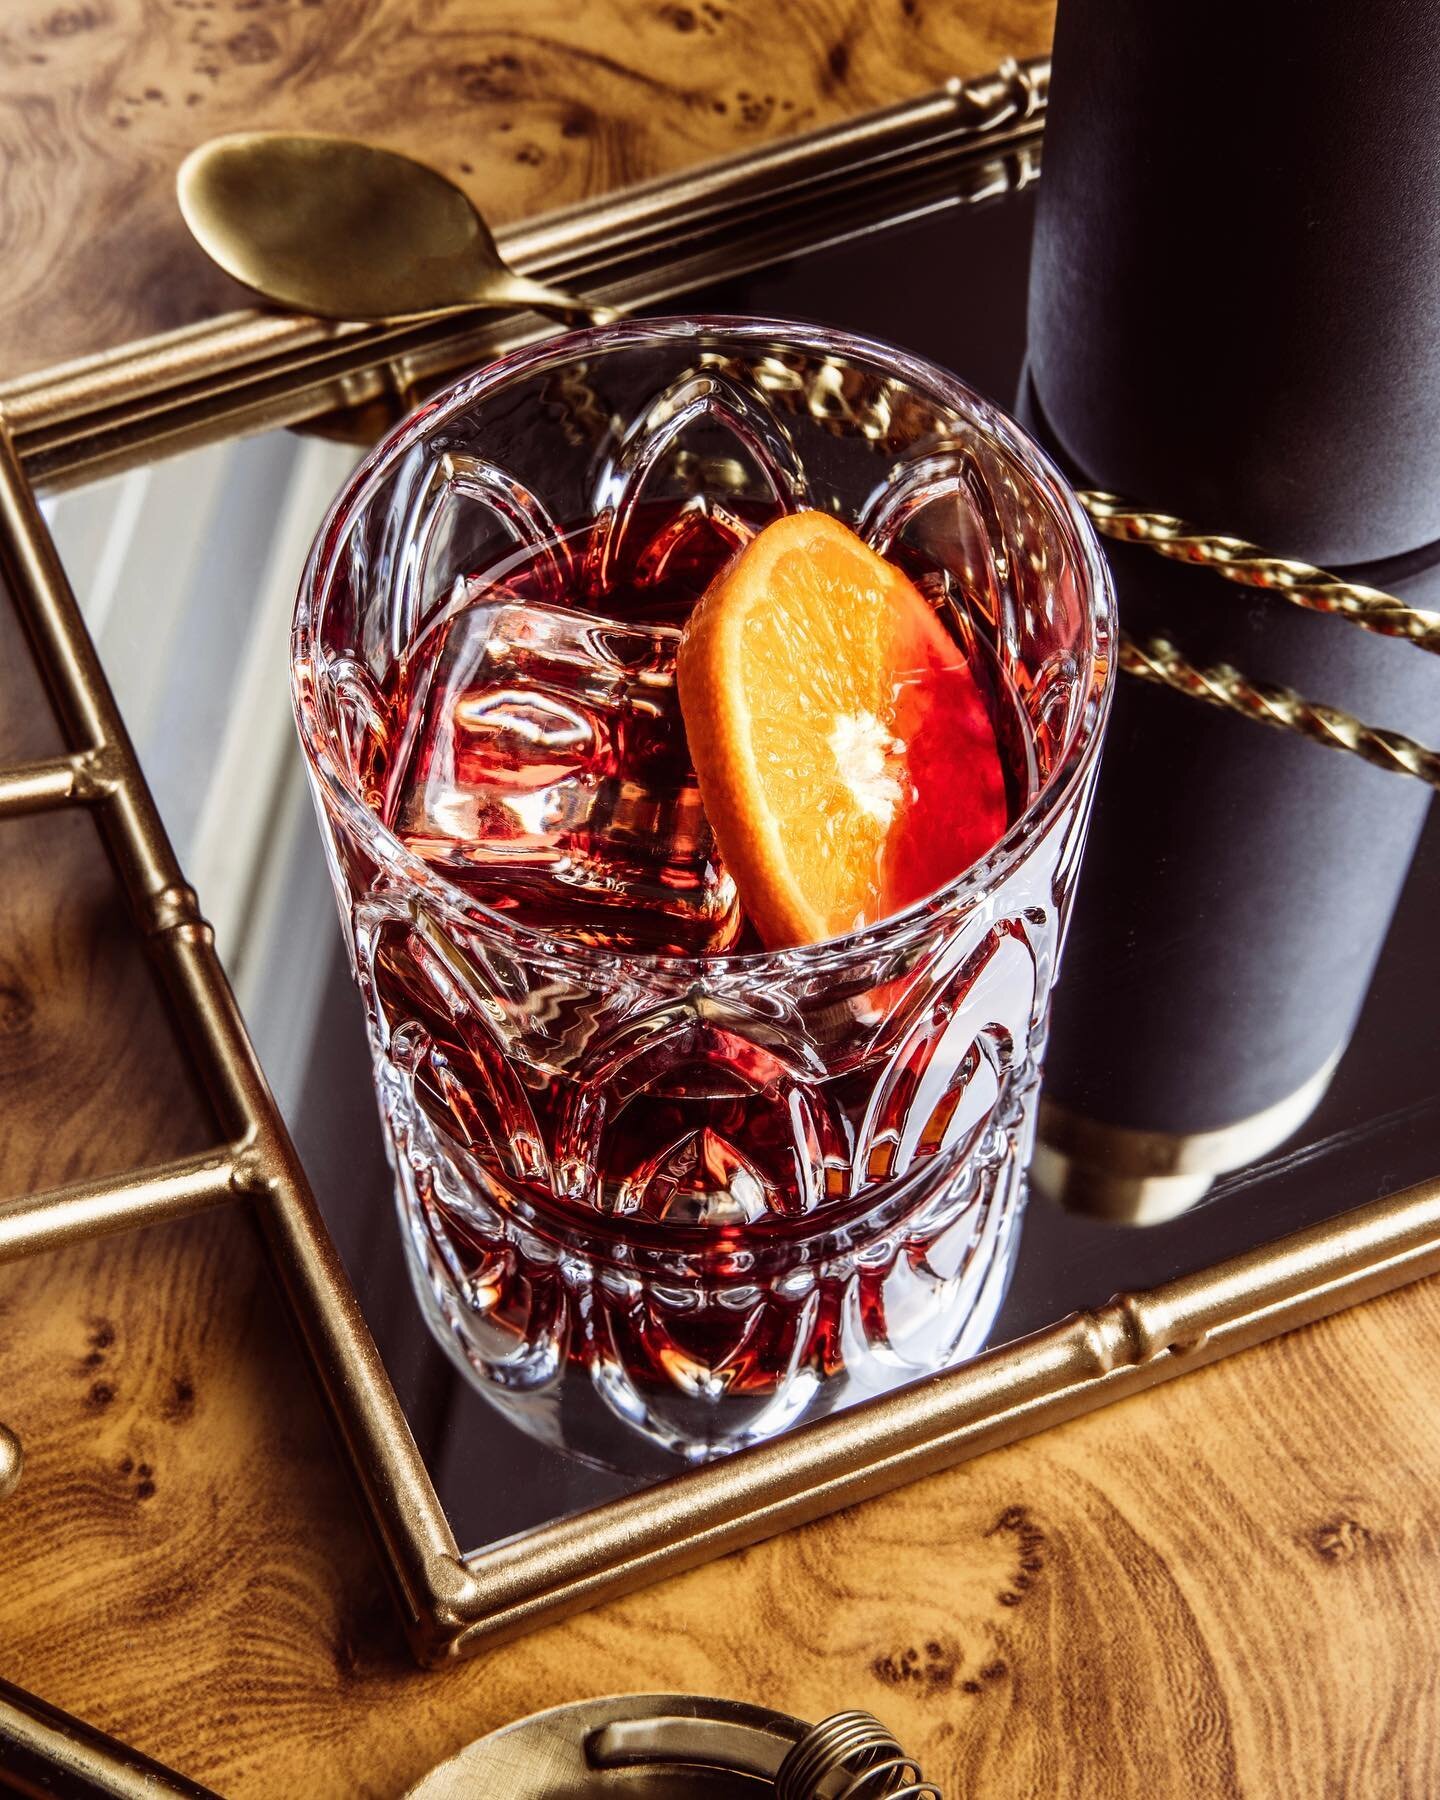 negroni? 

stir equal parts gin, sweet vermouth  and campari with ice until well-chilled. strain into a rocks glass with a large ice cube. garnish with orange. imbibe responsibly.